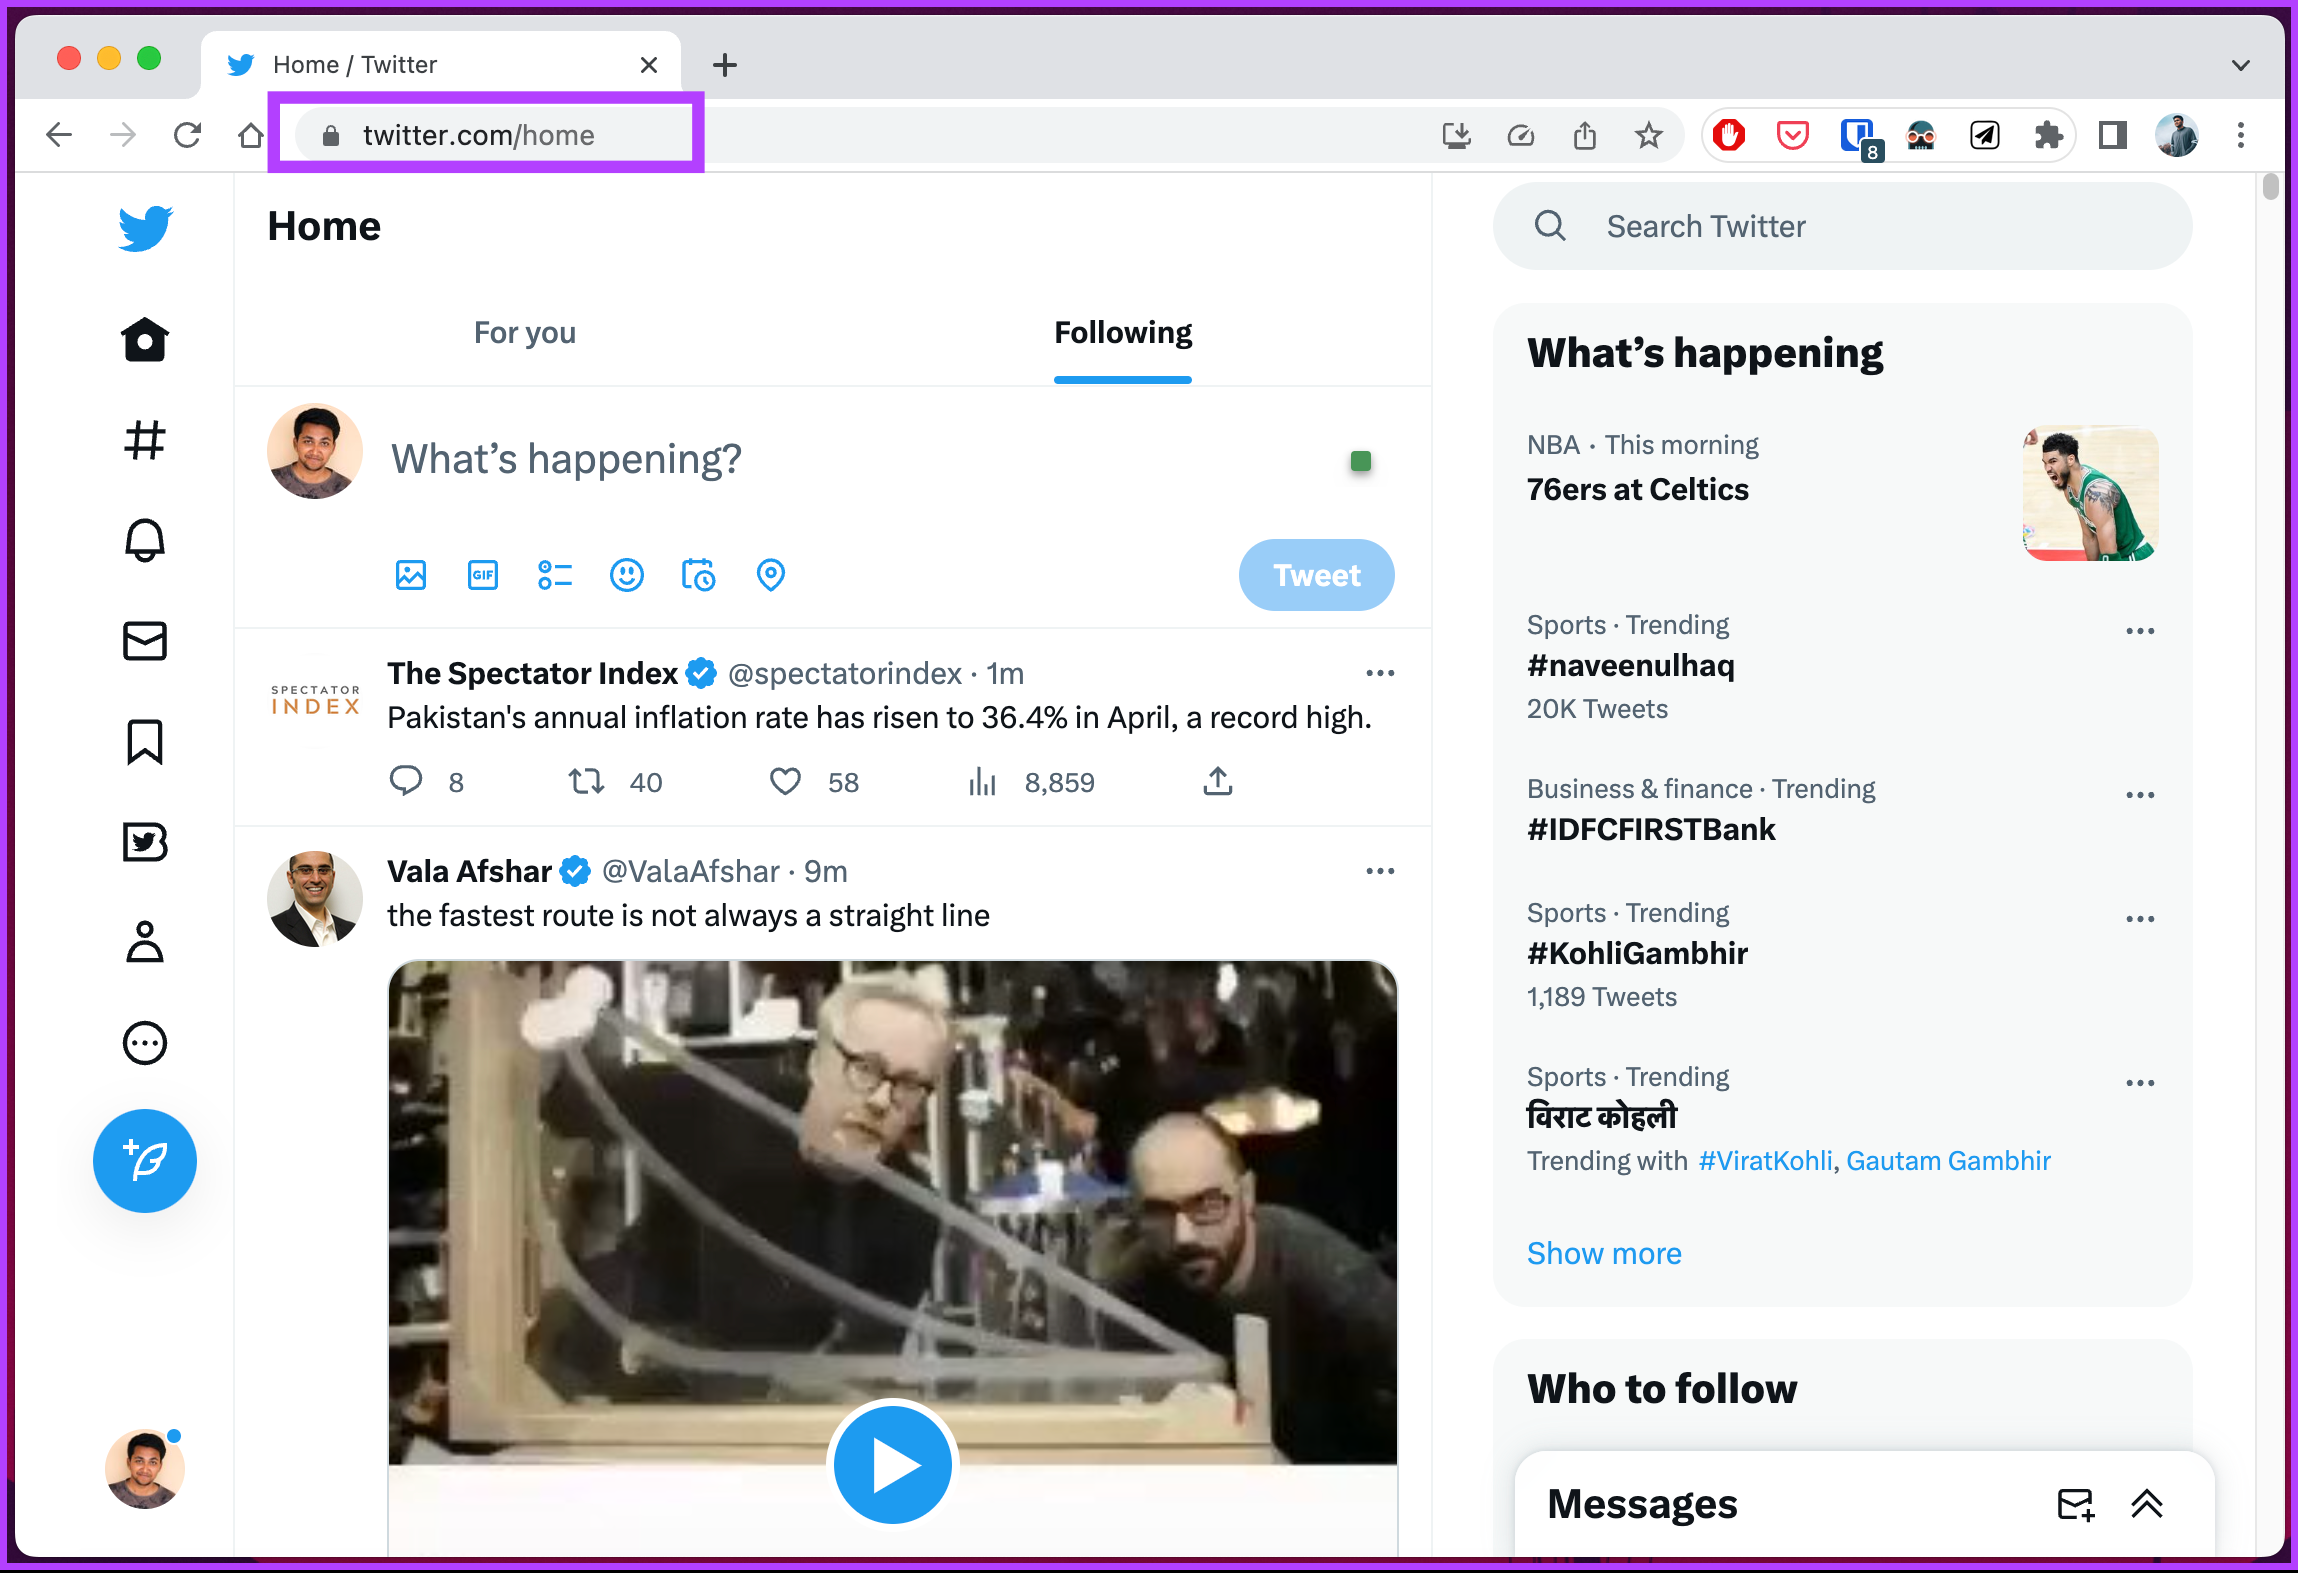 Open Twitter in your preferred browser